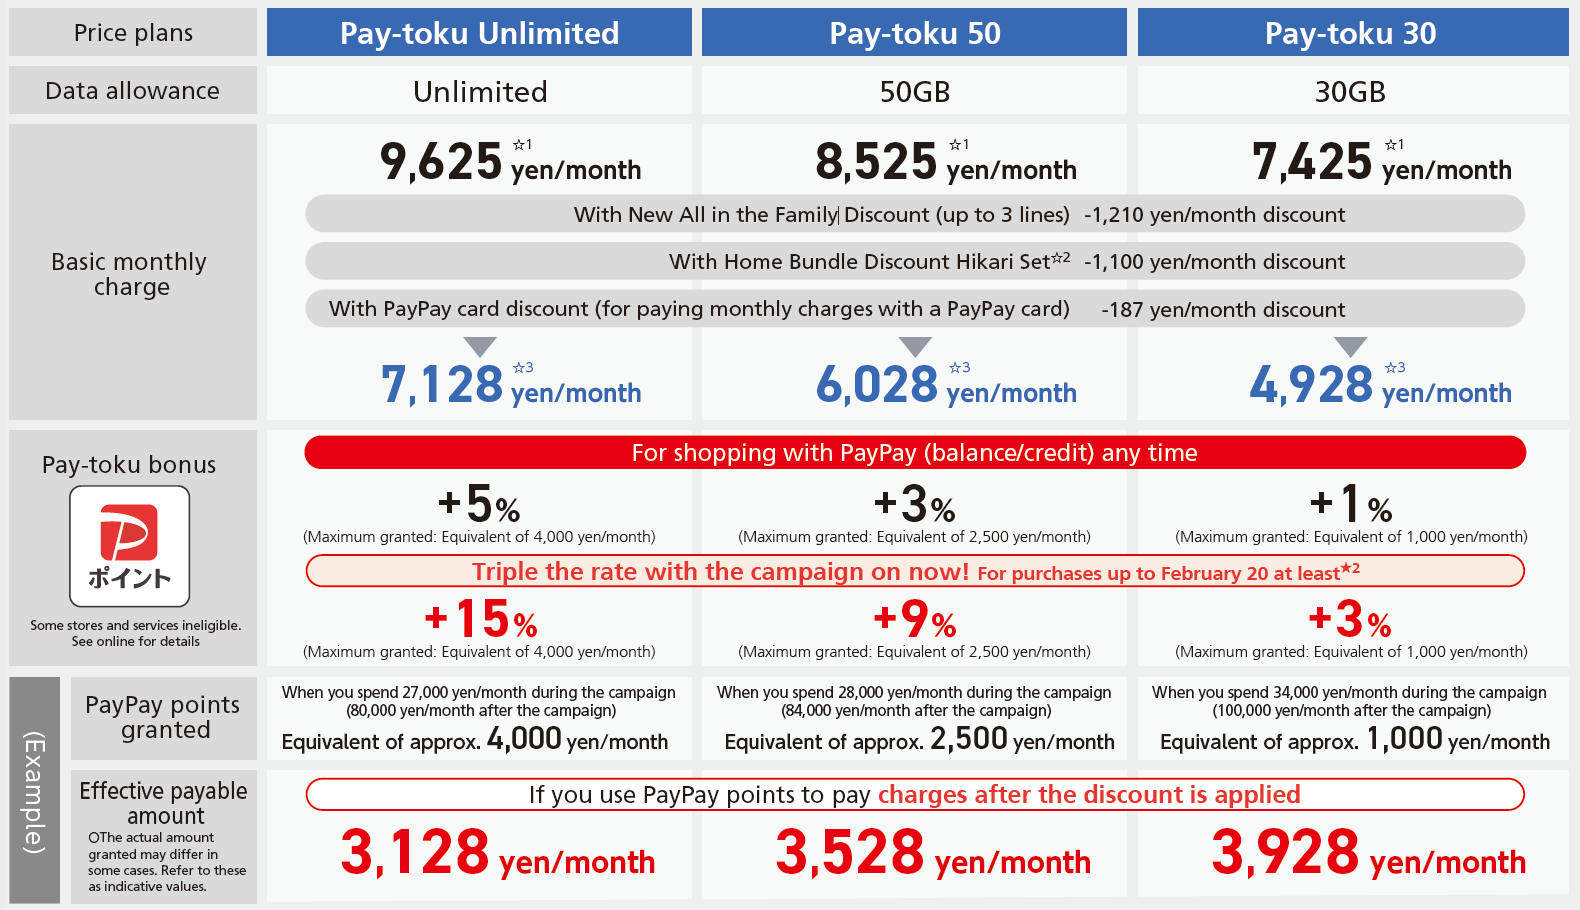 Price plans Data allowance Basic monthly charge Pay-toku Unlimited 9,625 yen/month☆1 Pay-toku 50 50GB 8,525 yen/month☆1 Pay-toku 30 30GB 7,425 yen/month☆1 With New All in the Family Discount (up to 3 lines) -1,210 yen/month discount With Home Bundle Discount Hikari Set☆2 -1,100 yen/month discount With PayPay card discount (for paying monthly charges with a PayPay card) -187 yen/month discount 7,128 yen/month ☆3 6,028 yen/month☆3 4,928 yen/month☆3 Pay-toku bonus Some stores and services ineligible.See online for details +5％(Maximum granted: Equivalent of 4,000 yen/month) +3％(Maximum granted: Equivalent of 2,500 yen/month) +1％(Maximum granted: Equivalent of 1,000 yen/month) Triple the rate with the campaign on now! For purchases up to February 20 at least★2 +15％(Maximum granted: Equivalent of 4,000 yen/month) +9％(Maximum granted: Equivalent of 2,500 yen/month) +3％When you spend 34,000 yen/month during the campaign(Maximum granted: Equivalent of 1,000 yen/month) (Example) PayPay points granted When you spend 27,000 yen/month during the campaign (80,000 yen/month after the campaign) Equivalent of approx. 4,000 yen/month When you spend 28,000 yen/month during the campaign (84,000 yen/month after the campaign) Equivalent of approx. 2,500 yen/month When you spend 34,000 yen/month during the campaign (100,000 yen/month after the campaign) Equivalent of approx. 1,000 yen/month Effective payable amount〇The actual amount granted may differ in some cases. Refer to these as indicative values.If you use PayPay points to pay charges after the discount is applied 3,128 yen/month 3,528 yen/month 3,928 yen/month
